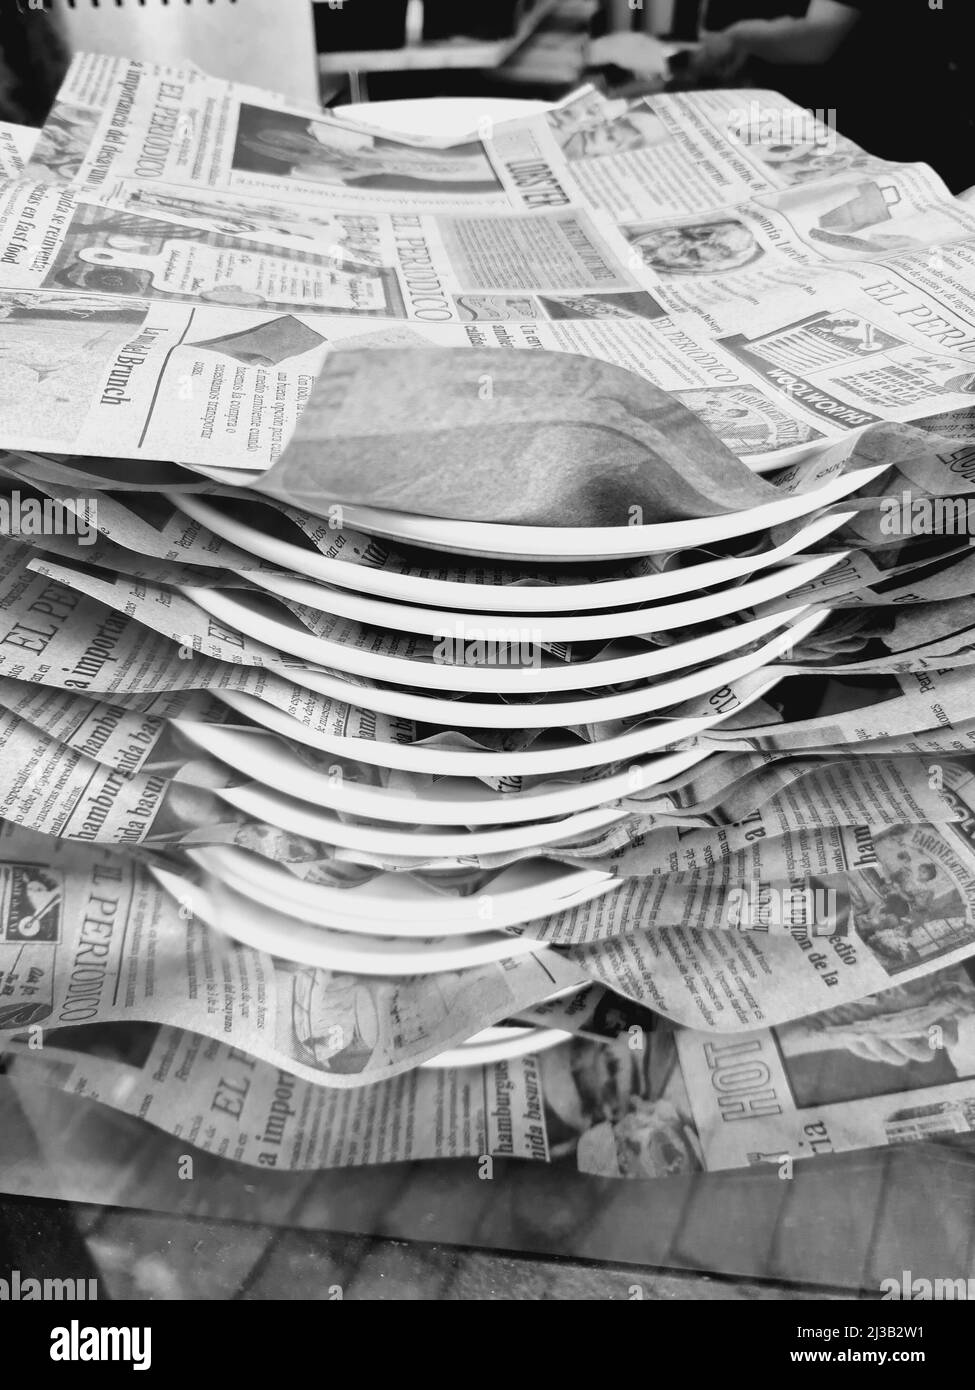 Plates of food with sheets of newspaper on top, black and white photography. Stock Photo